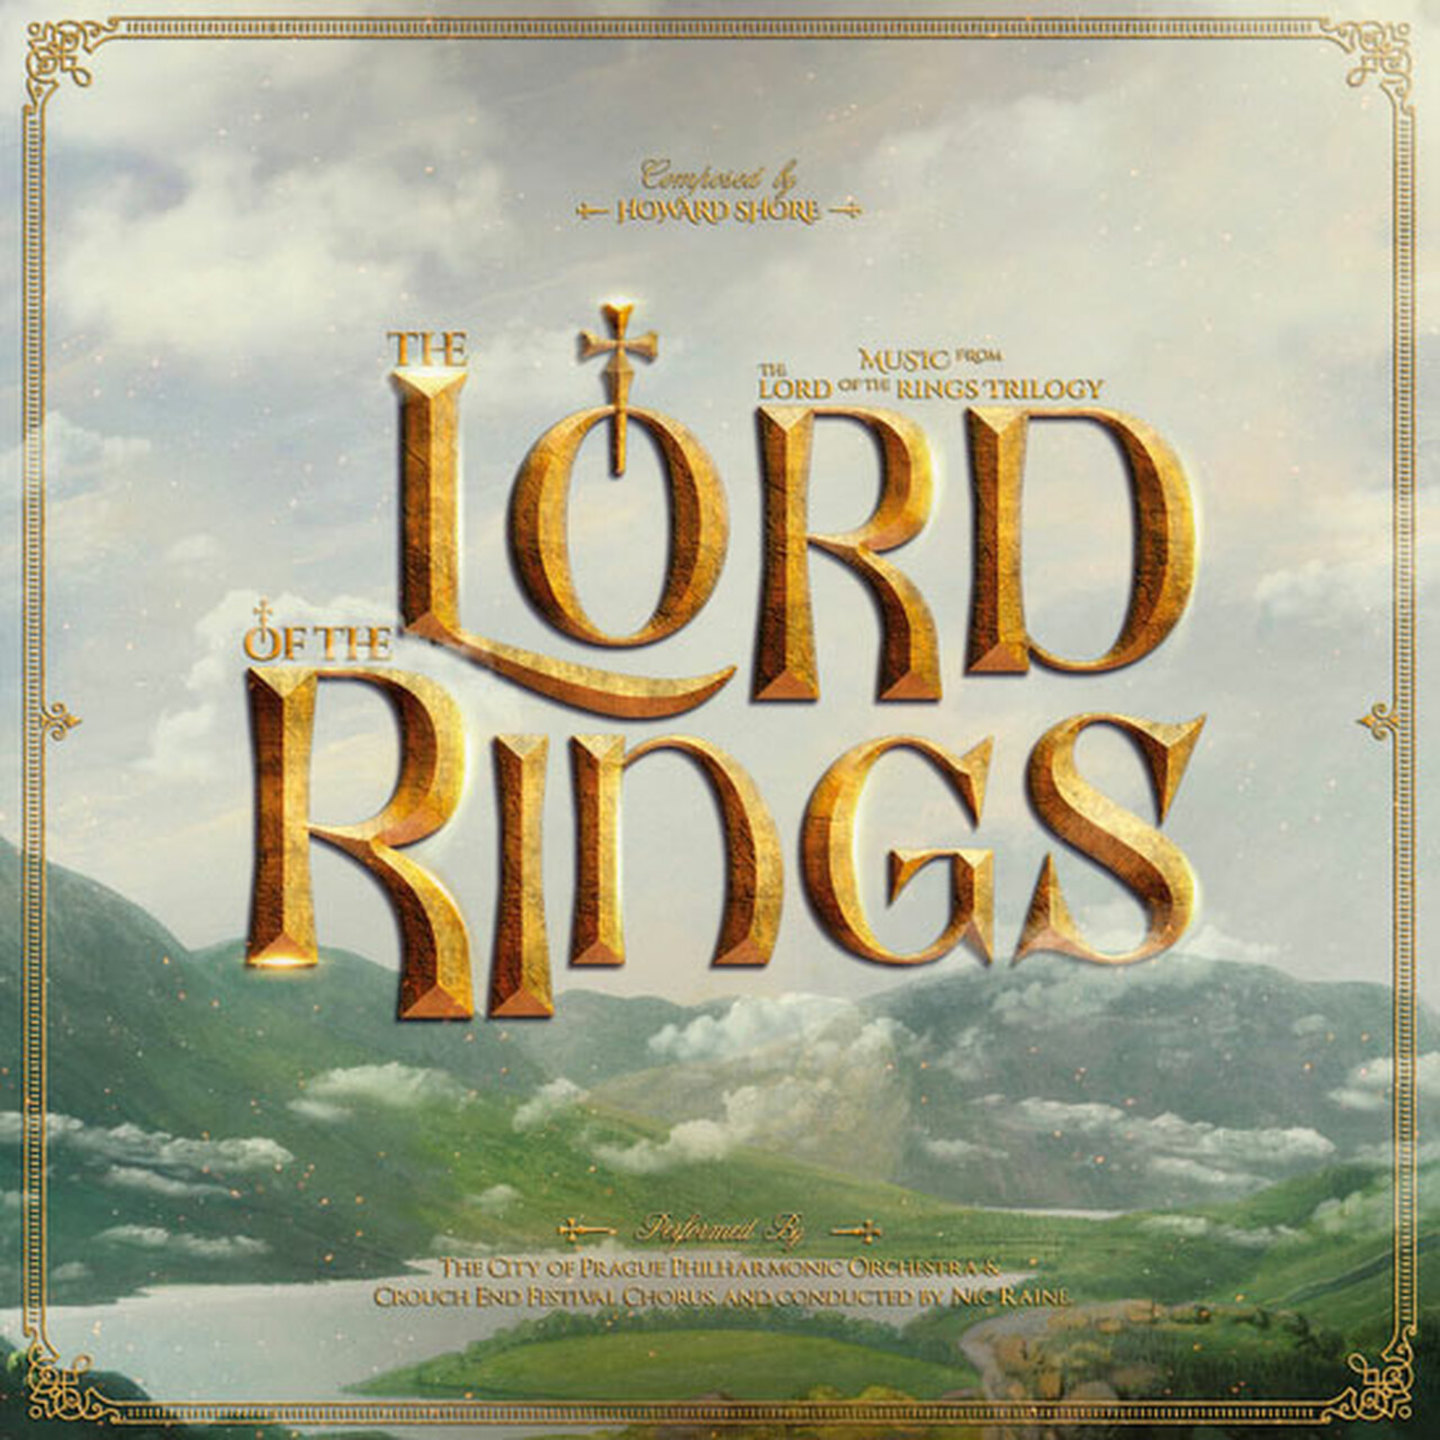 CITY OF PRAGUE PHILHARMONIC ORCHESTRA, THE - The Lord Of The Rings Trilogy 3xLP Colour Vinyl